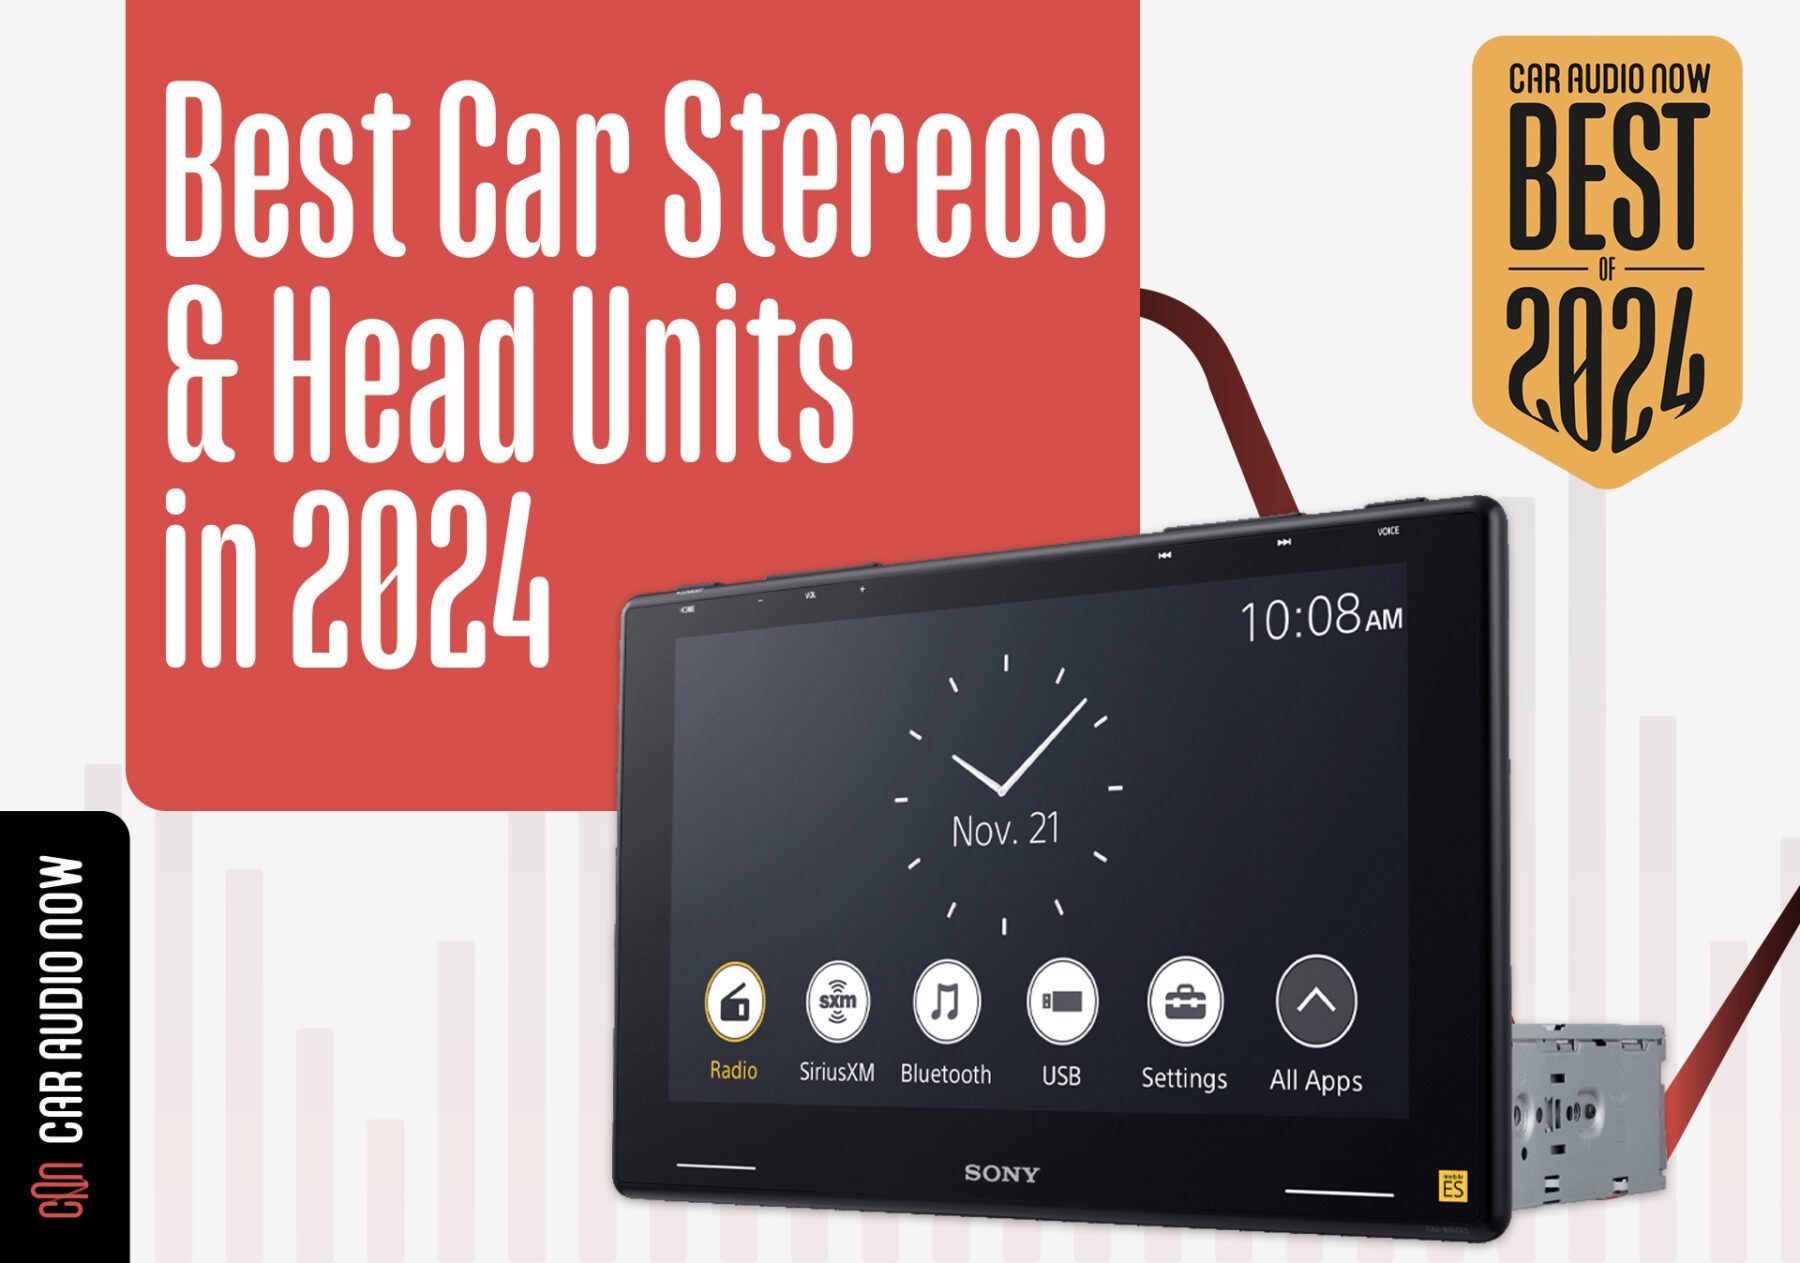 Stereo opel combo car radio player Sets for All Types of Models